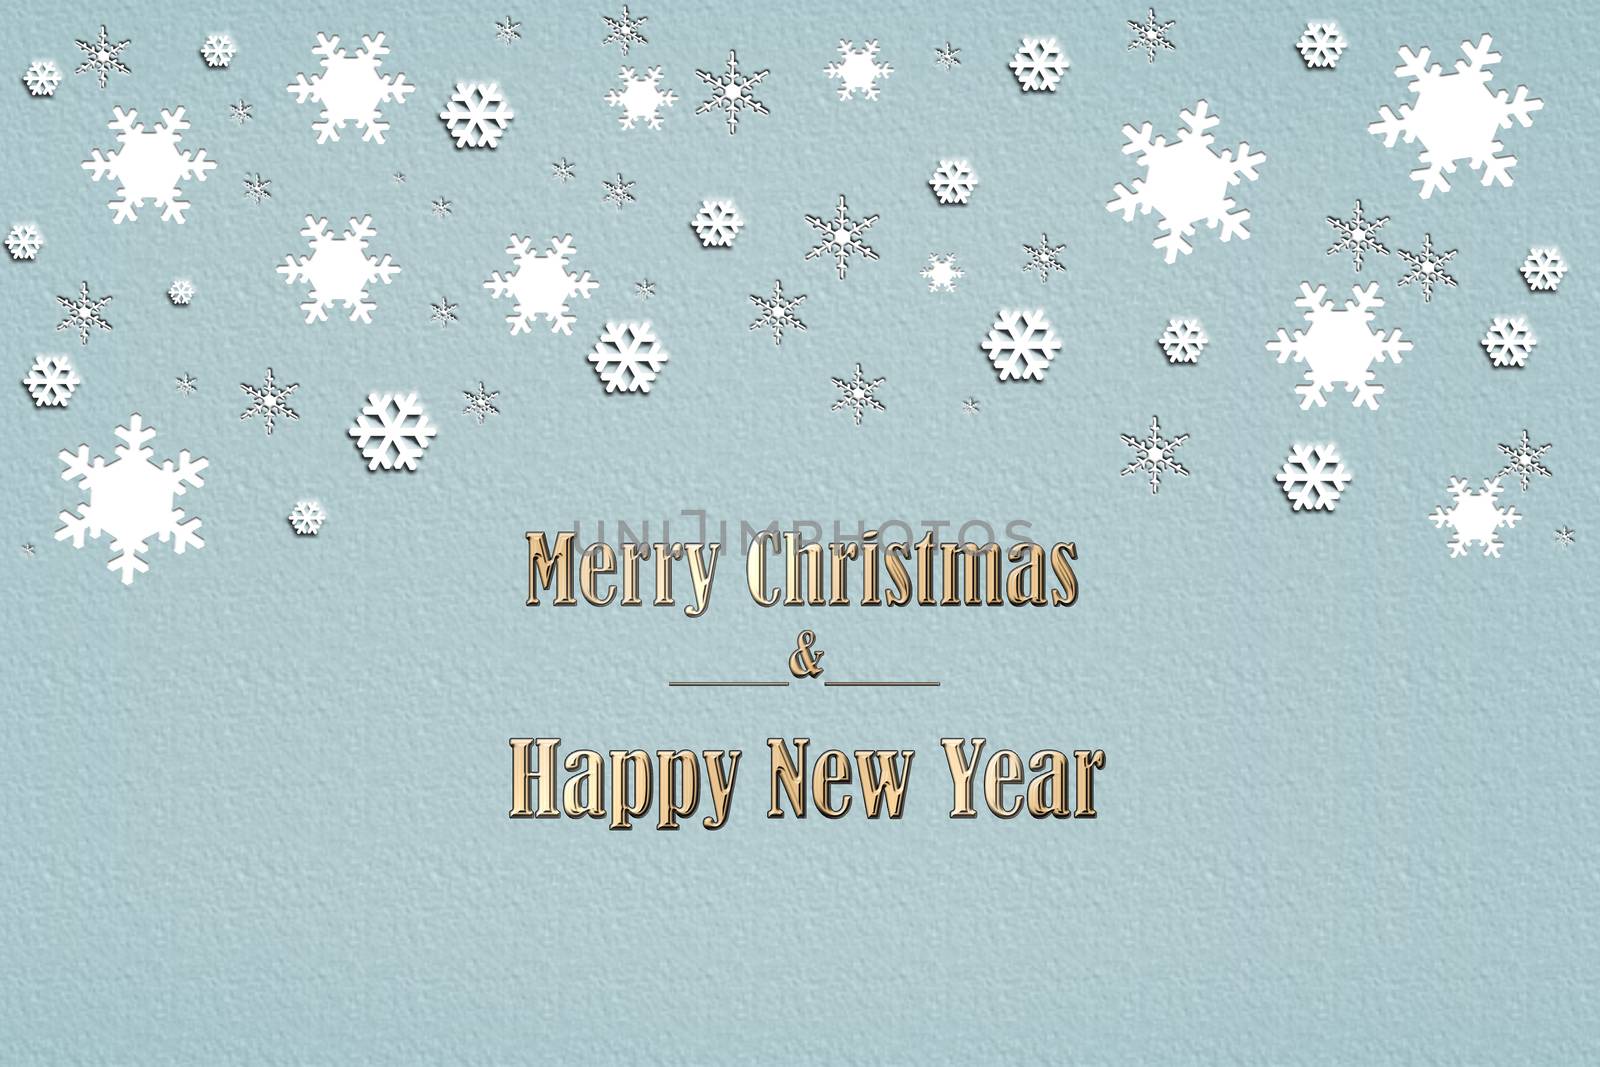 Stylish beautiful snowflakes design for winter, text Merry Christmas and Happy New Year. Abstract Paper Craft Snowflakes pastel background. Greeting Christmas card. Paper art design. 3D illustration.